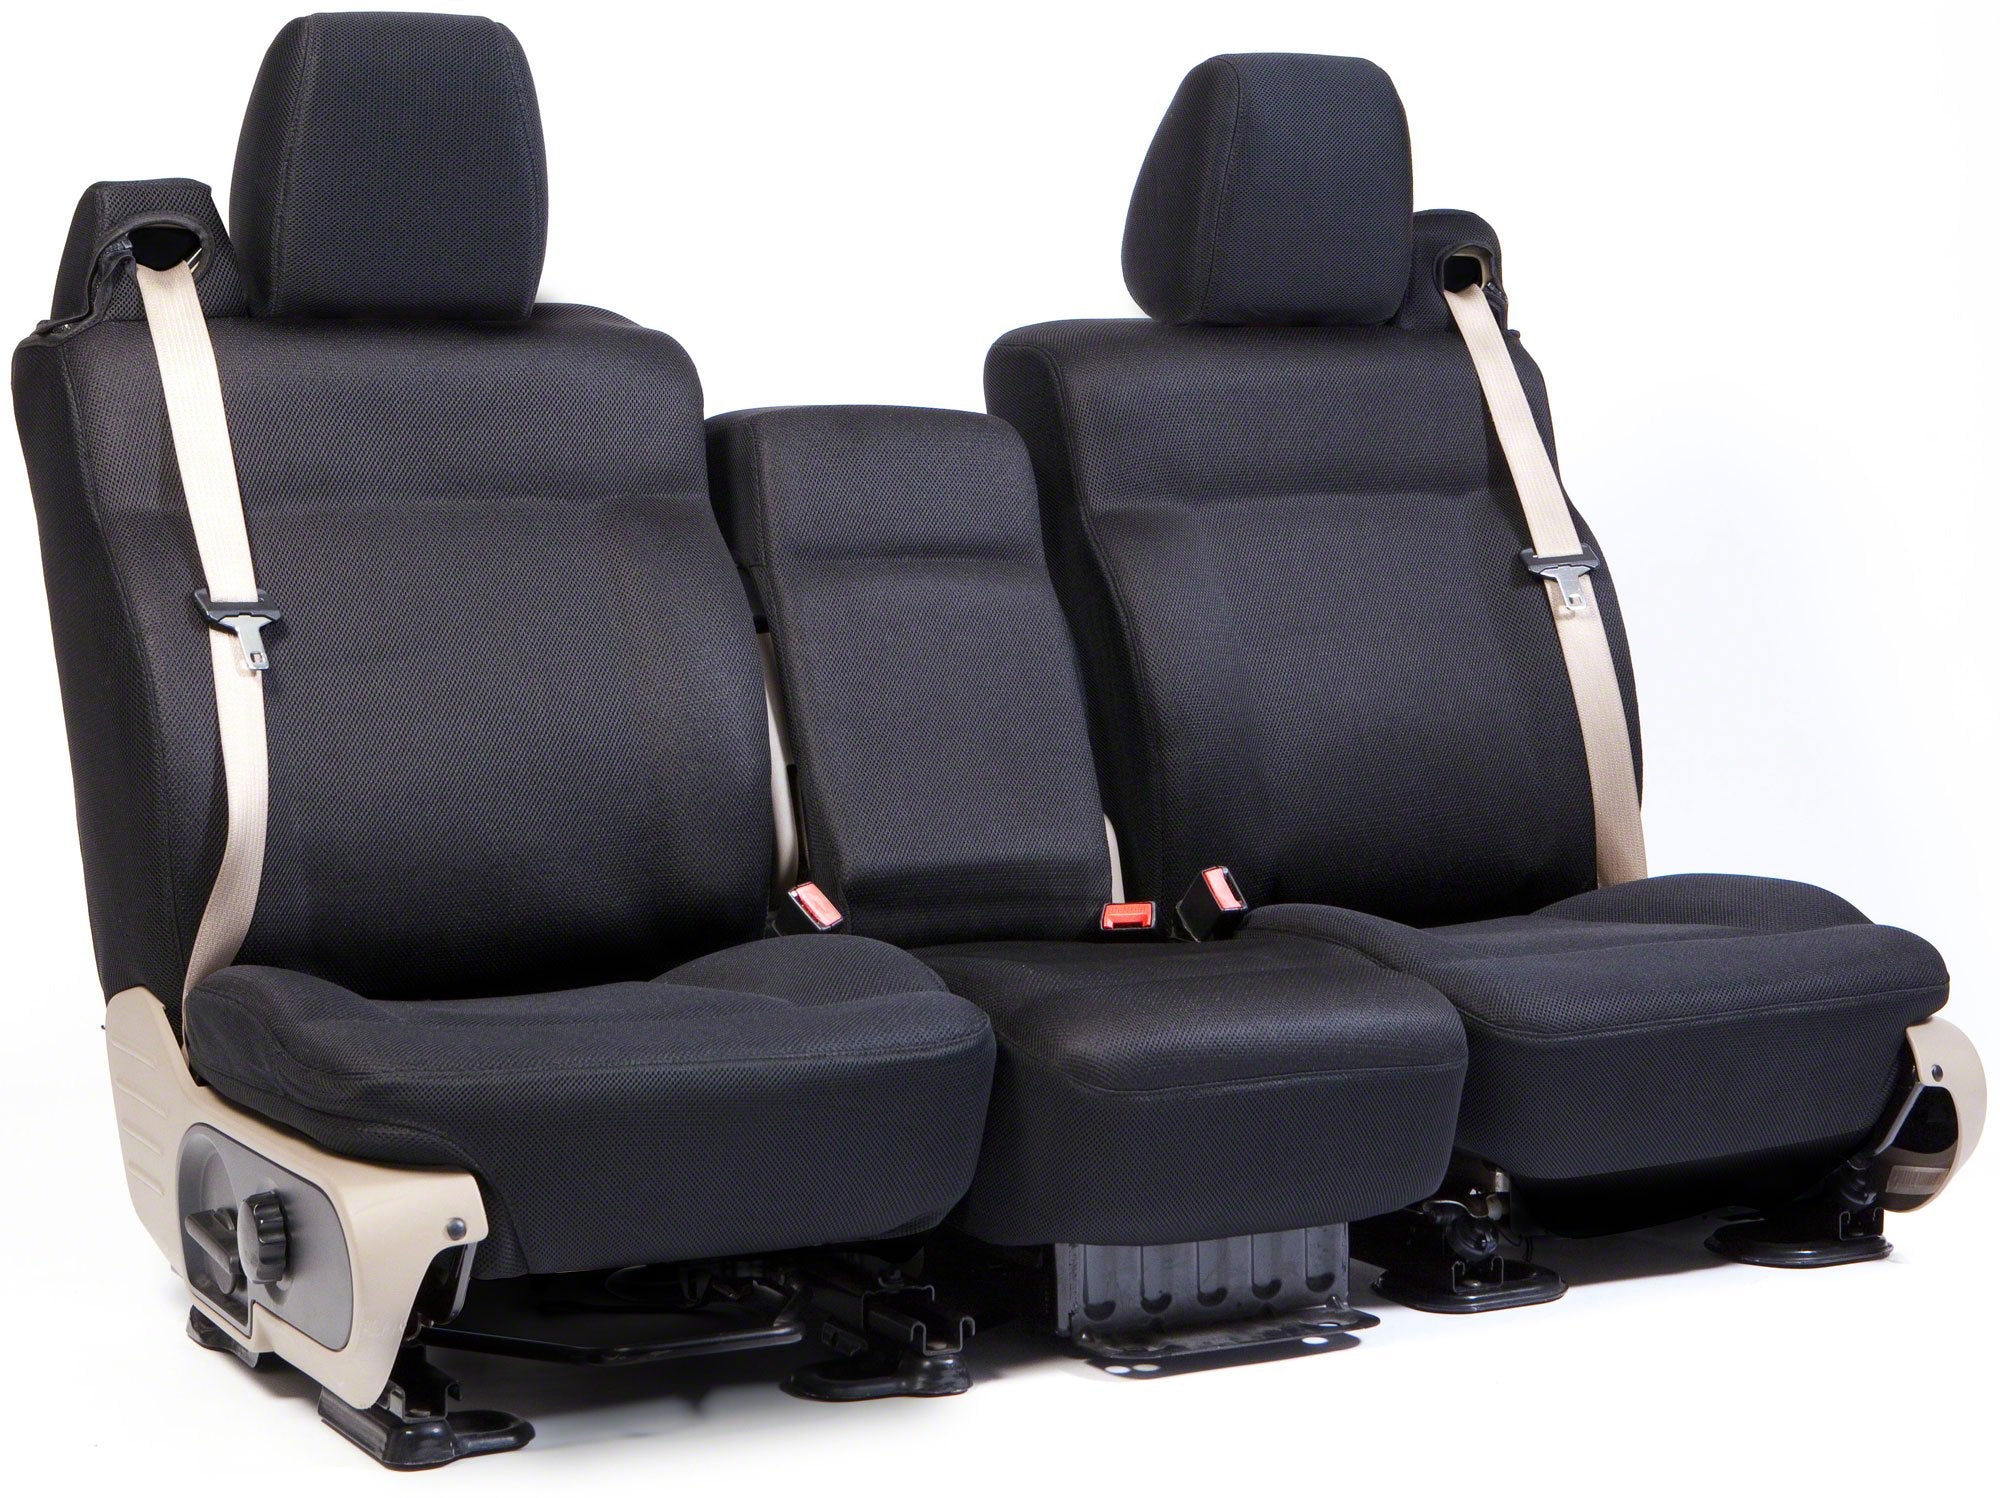 Molded Custom Car Seat Covers from Coverking